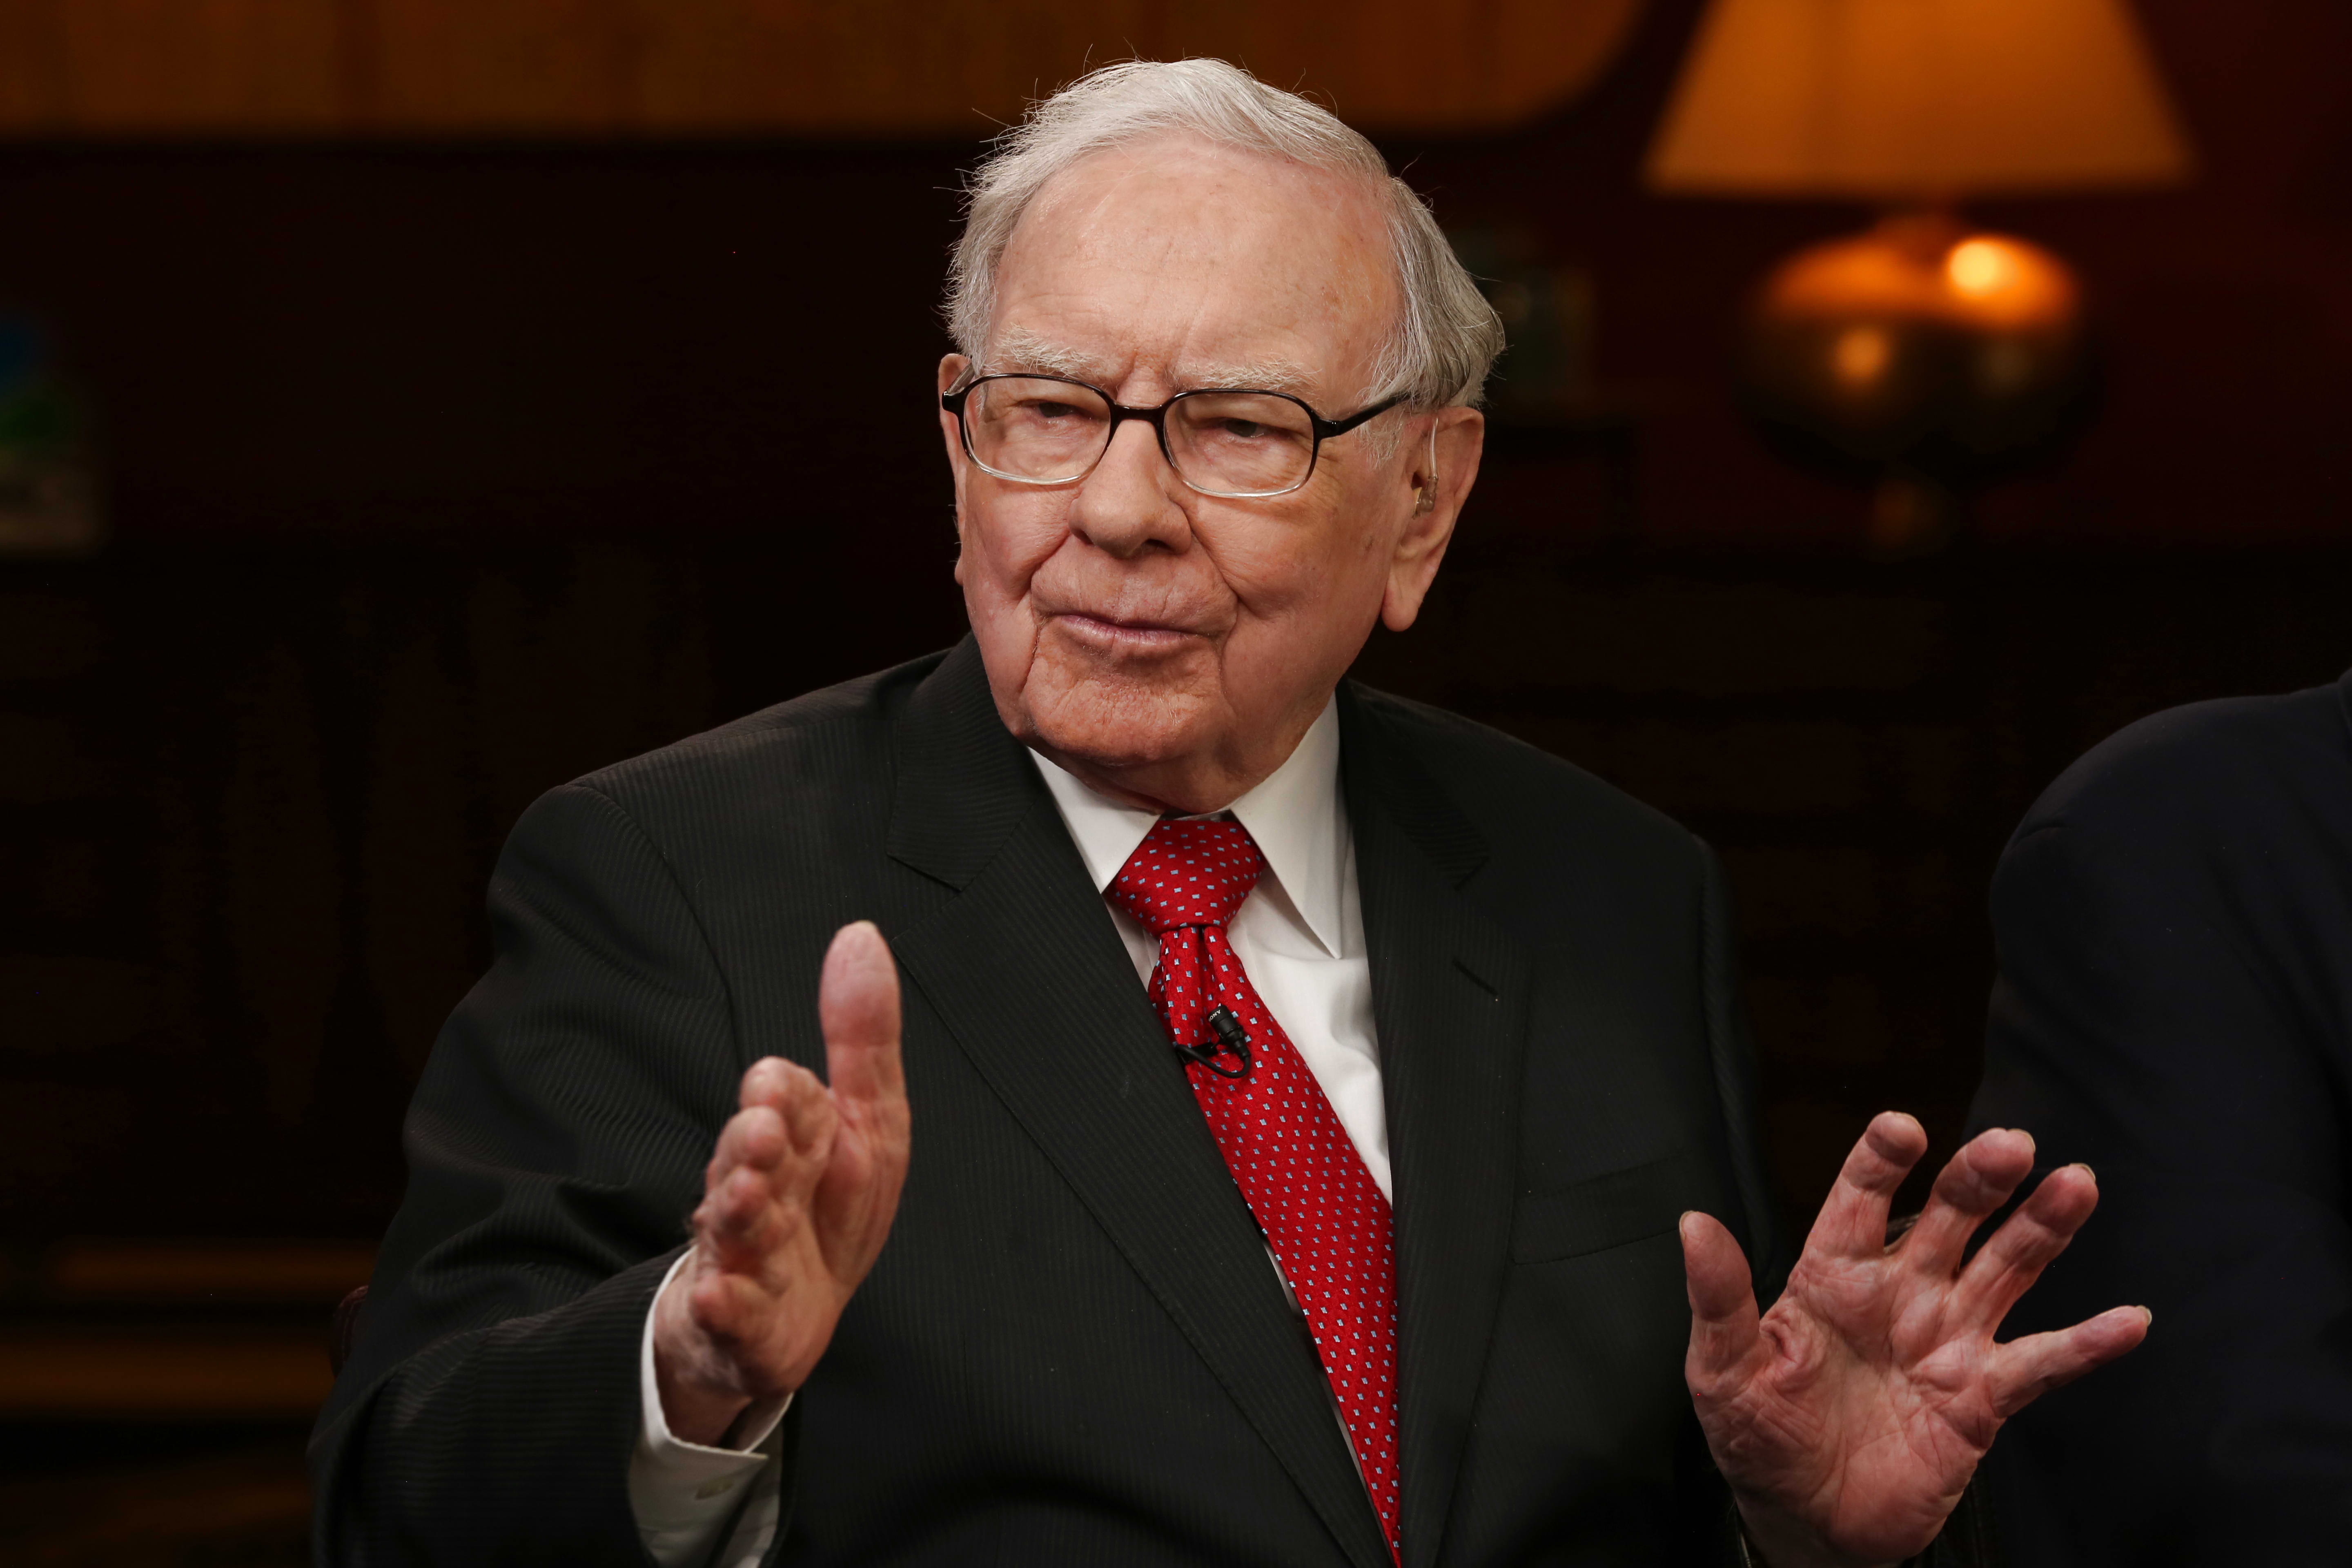 Warren Buffett says he ‘would never bet against America’ in the letter trumpeting Berkshire’s US assets